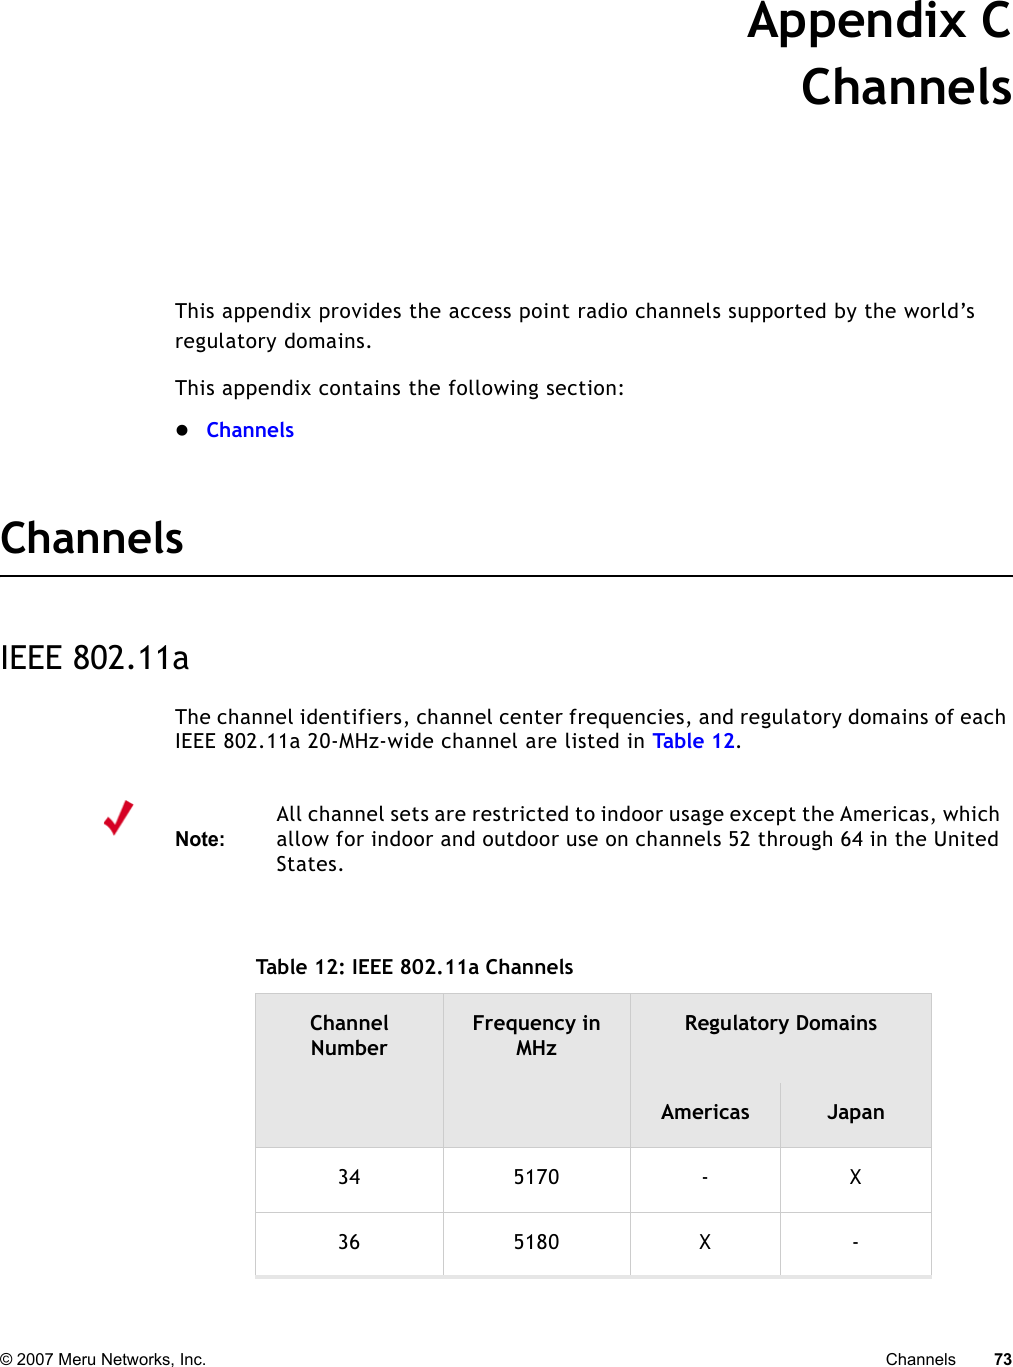 © 2007 Meru Networks, Inc. Channels 73 Appendix CChannelsB-1This appendix provides the access point radio channels supported by the world’s regulatory domains.This appendix contains the following section:zChannelsChannelsIEEE 802.11aThe channel identifiers, channel center frequencies, and regulatory domains of each IEEE 802.11a 20-MHz-wide channel are listed in Tab le 1 2. Note:All channel sets are restricted to indoor usage except the Americas, which allow for indoor and outdoor use on channels 52 through 64 in the United States. Table 12: IEEE 802.11a Channels Channel NumberFrequency in MHzRegulatory DomainsAmericas Japan34 5170 - X36 5180 X -